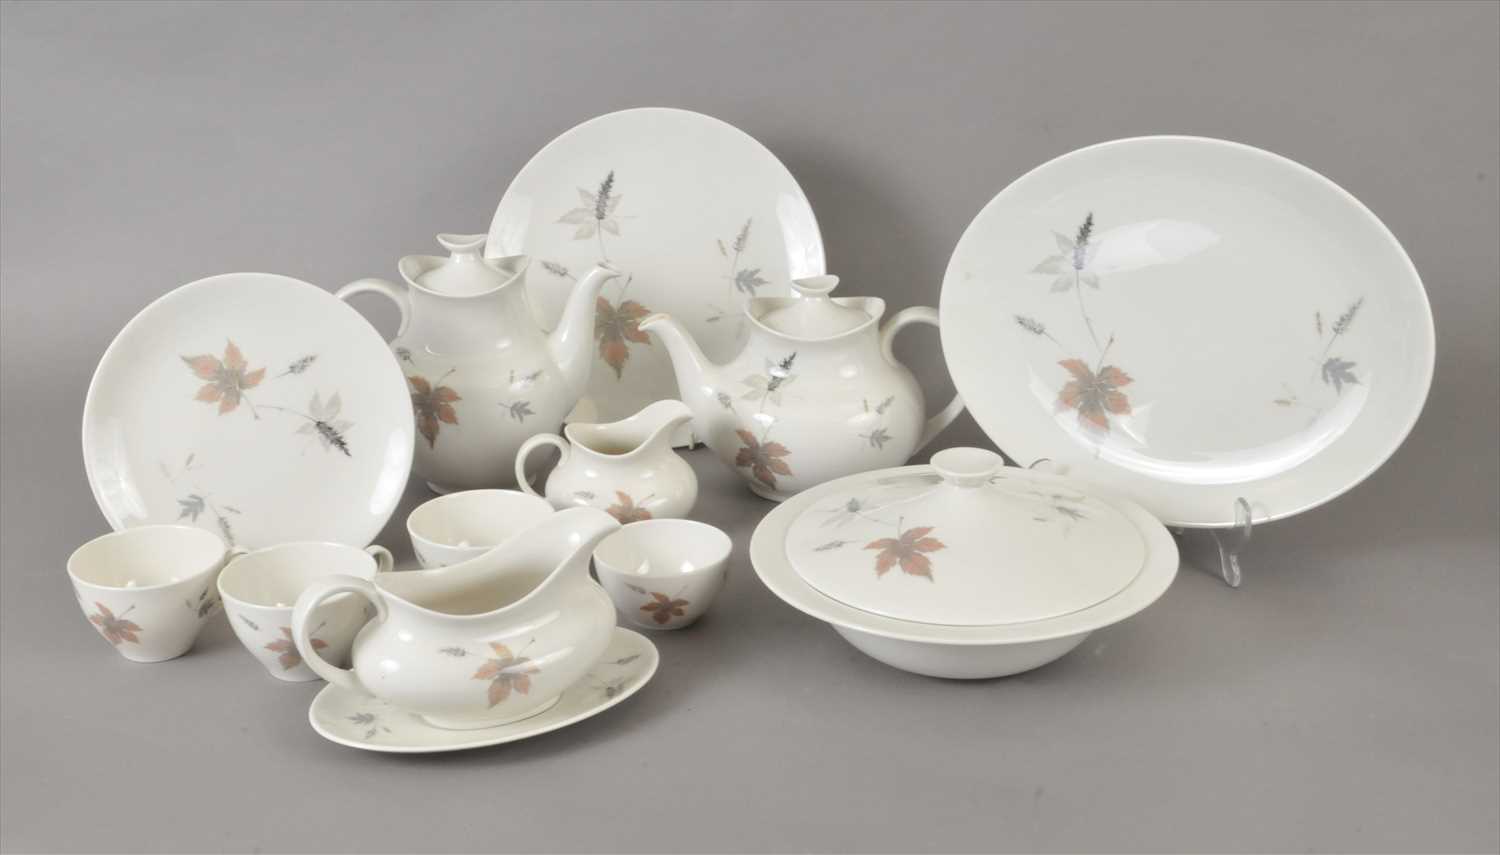 Lot 20 - Royal Doulton 'Tumbling Leaves' tea, coffee and dinner service